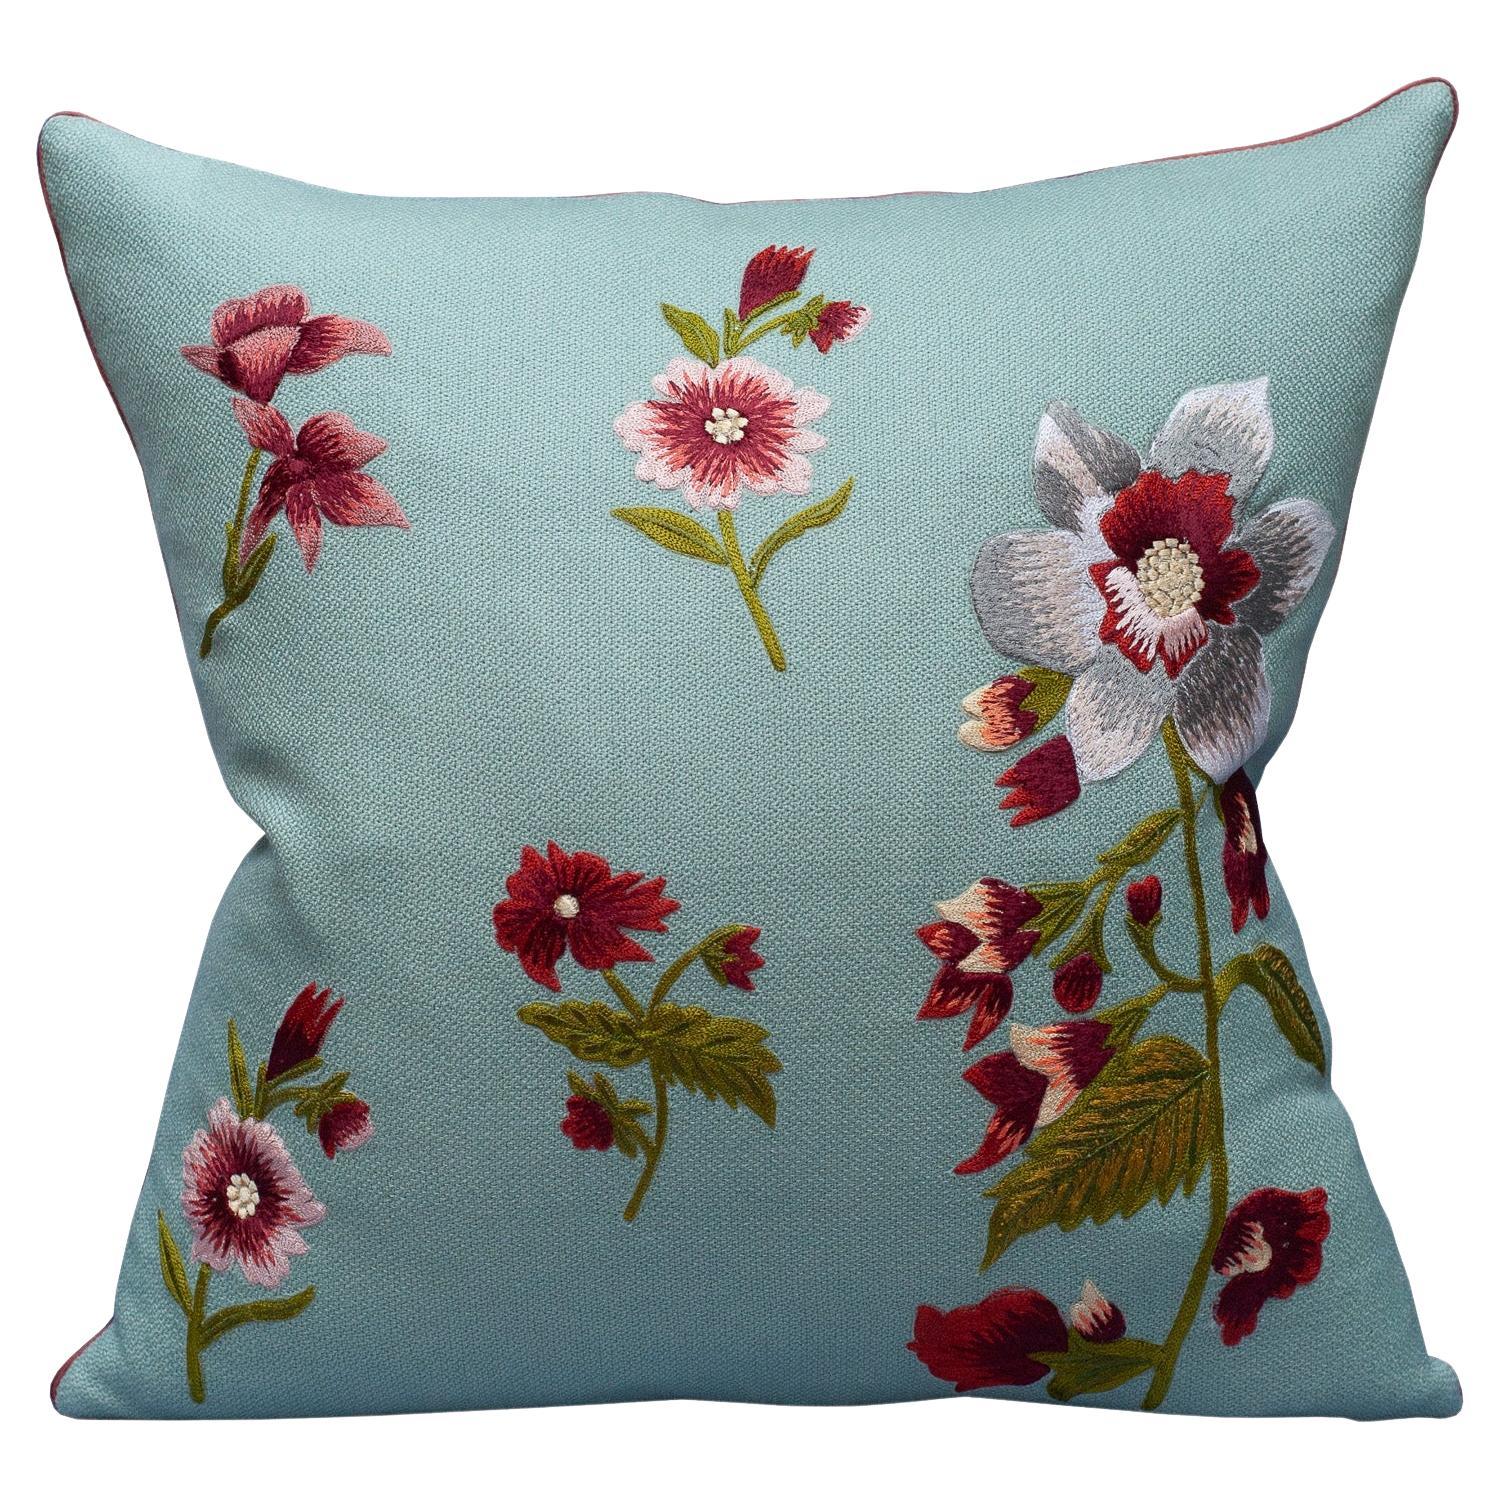 Contemporary Soft Blue Merino Wool and Linen Pillow with Embroidered Florals For Sale